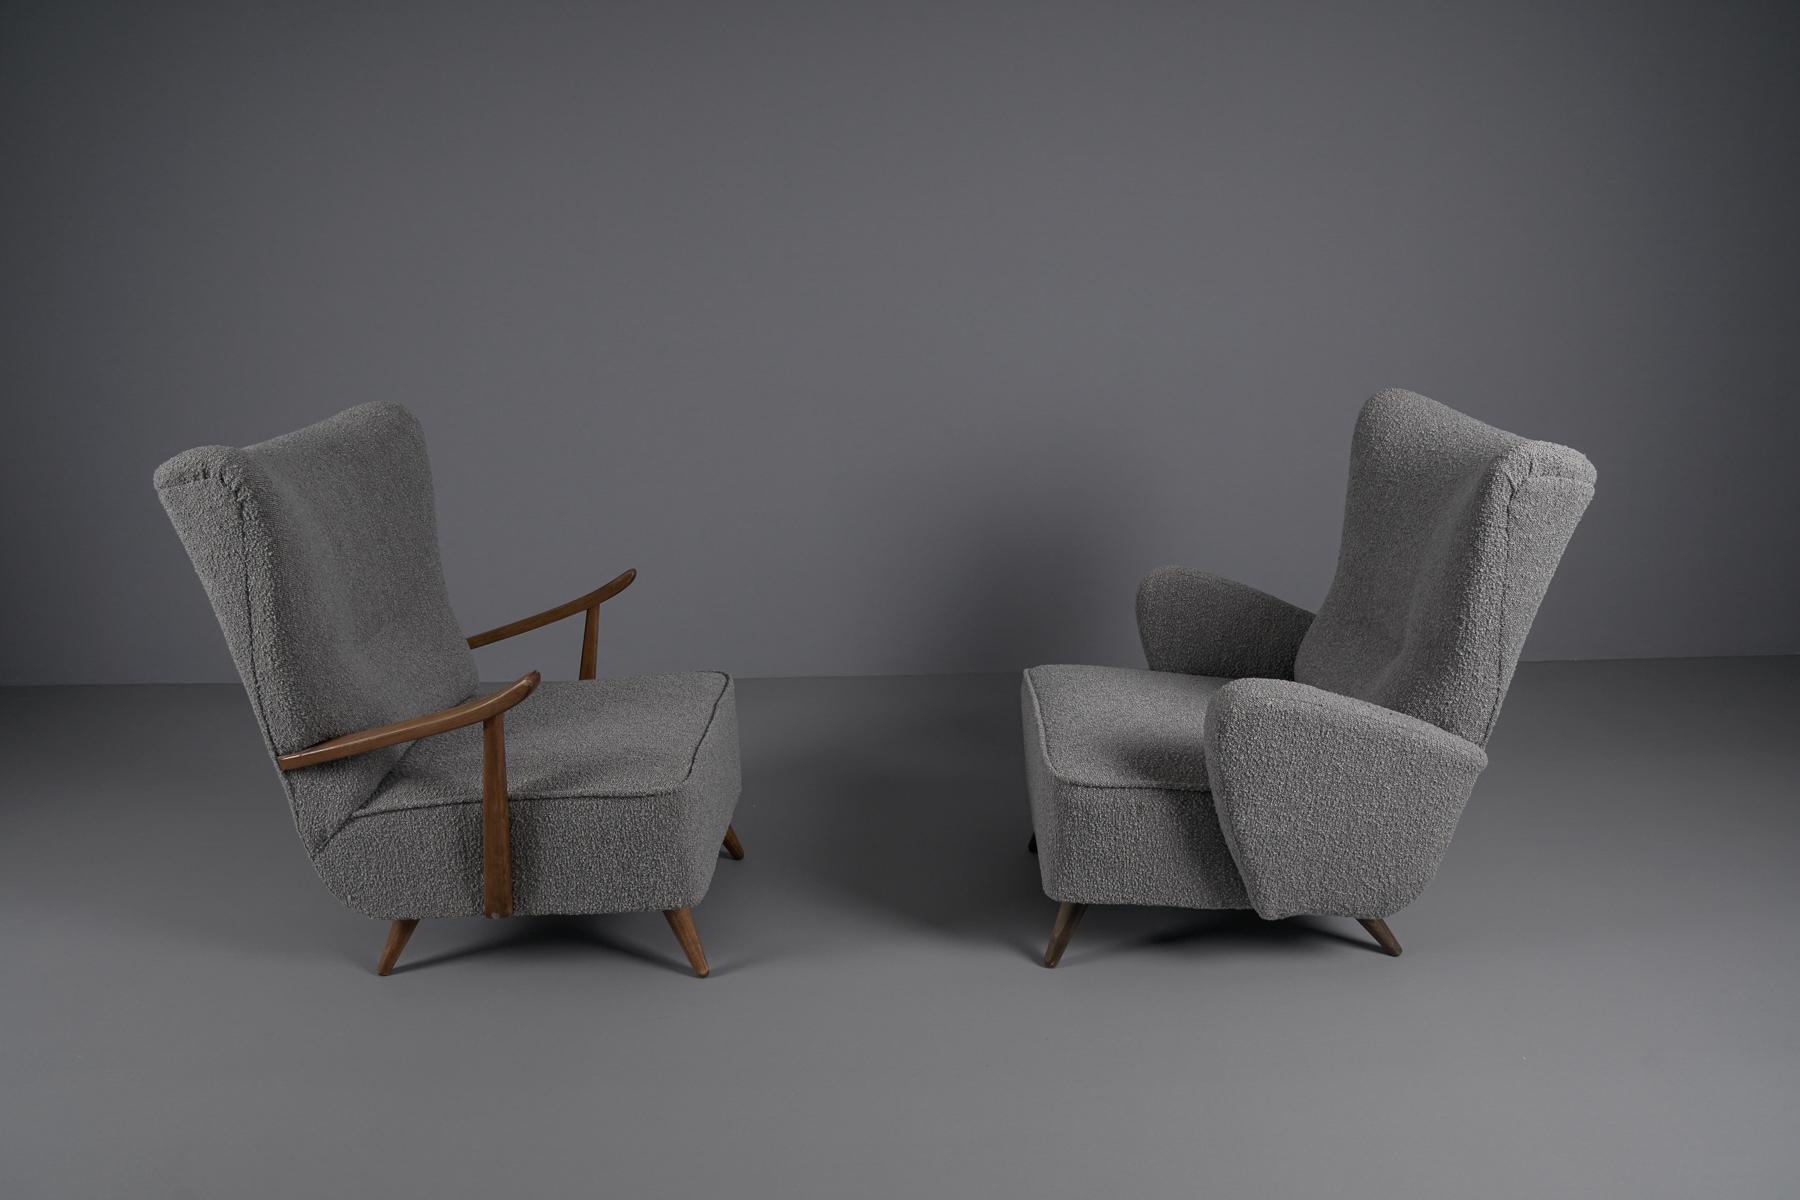 Pair of Large Wingback Armchairs in Grey Boucle Fabric, 1950s For Sale 2